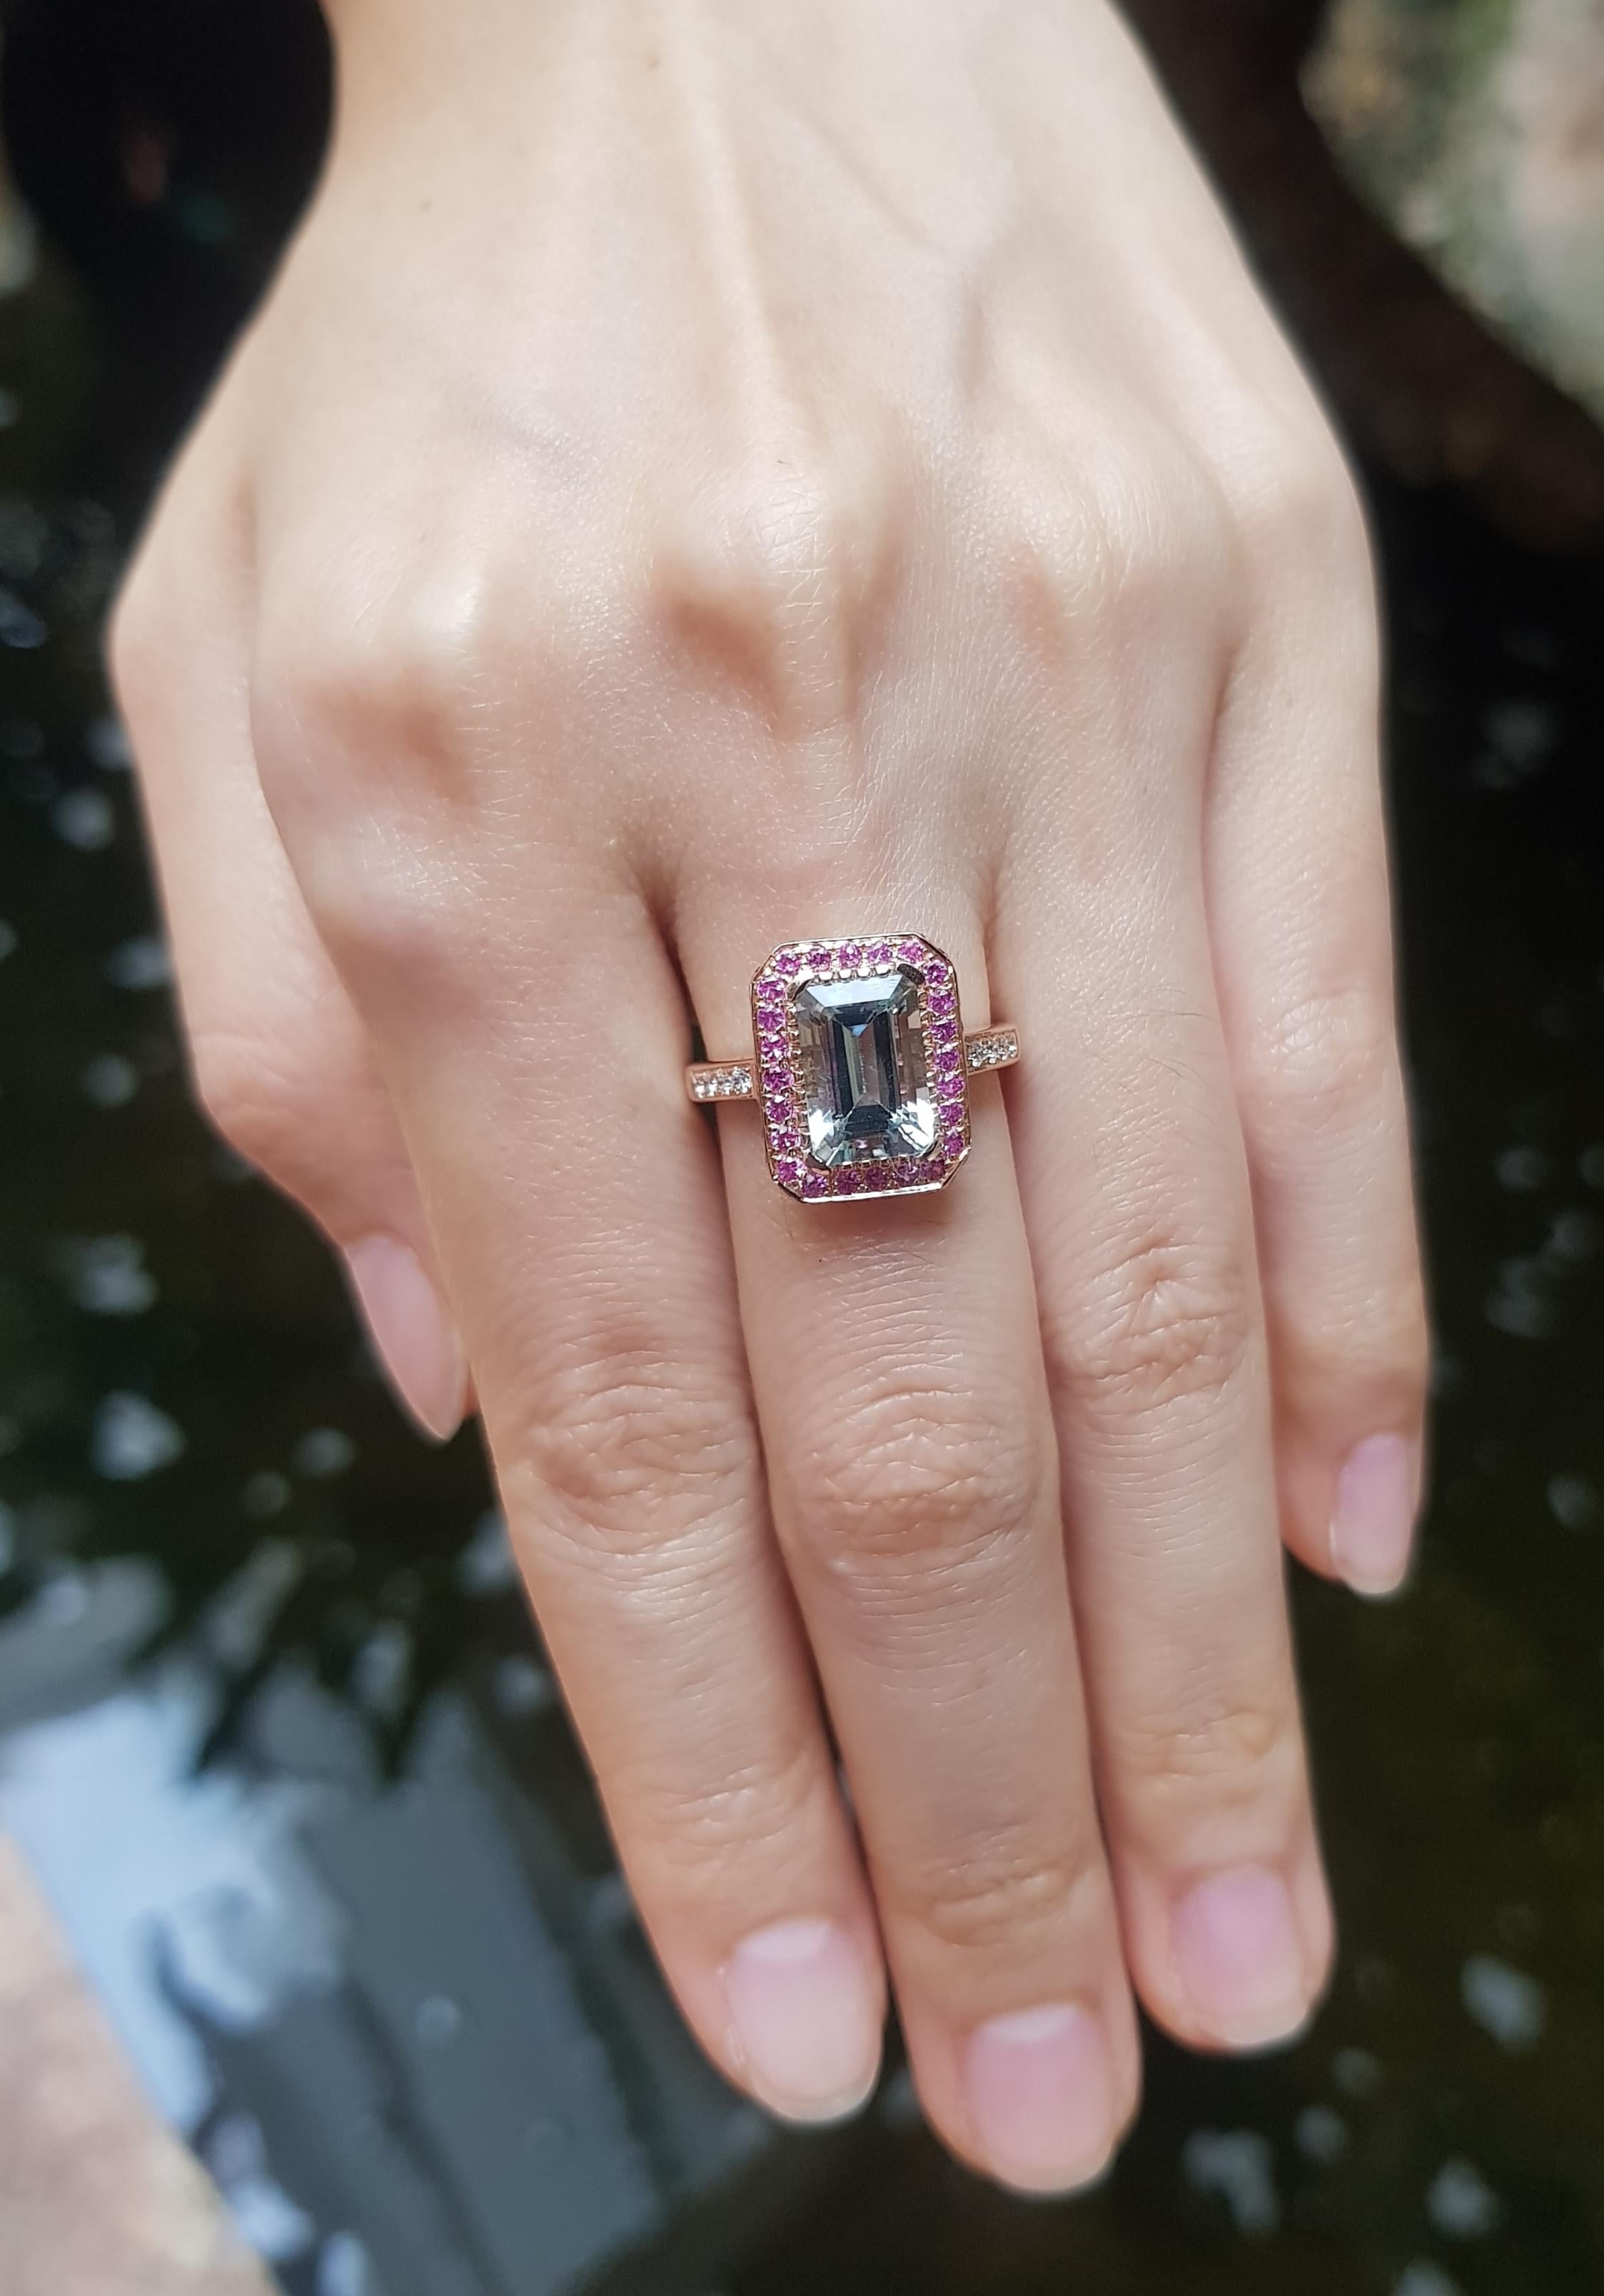 Aquamarine 2.08 carats, Pink Sapphire 0.57 carat and Diamond 0.10 carat Ring set in 18K Rose Gold Settings

Width:  1.1 cm 
Length: 1.4 cm
Ring Size: 53
Total Weight: 4.69 grams

